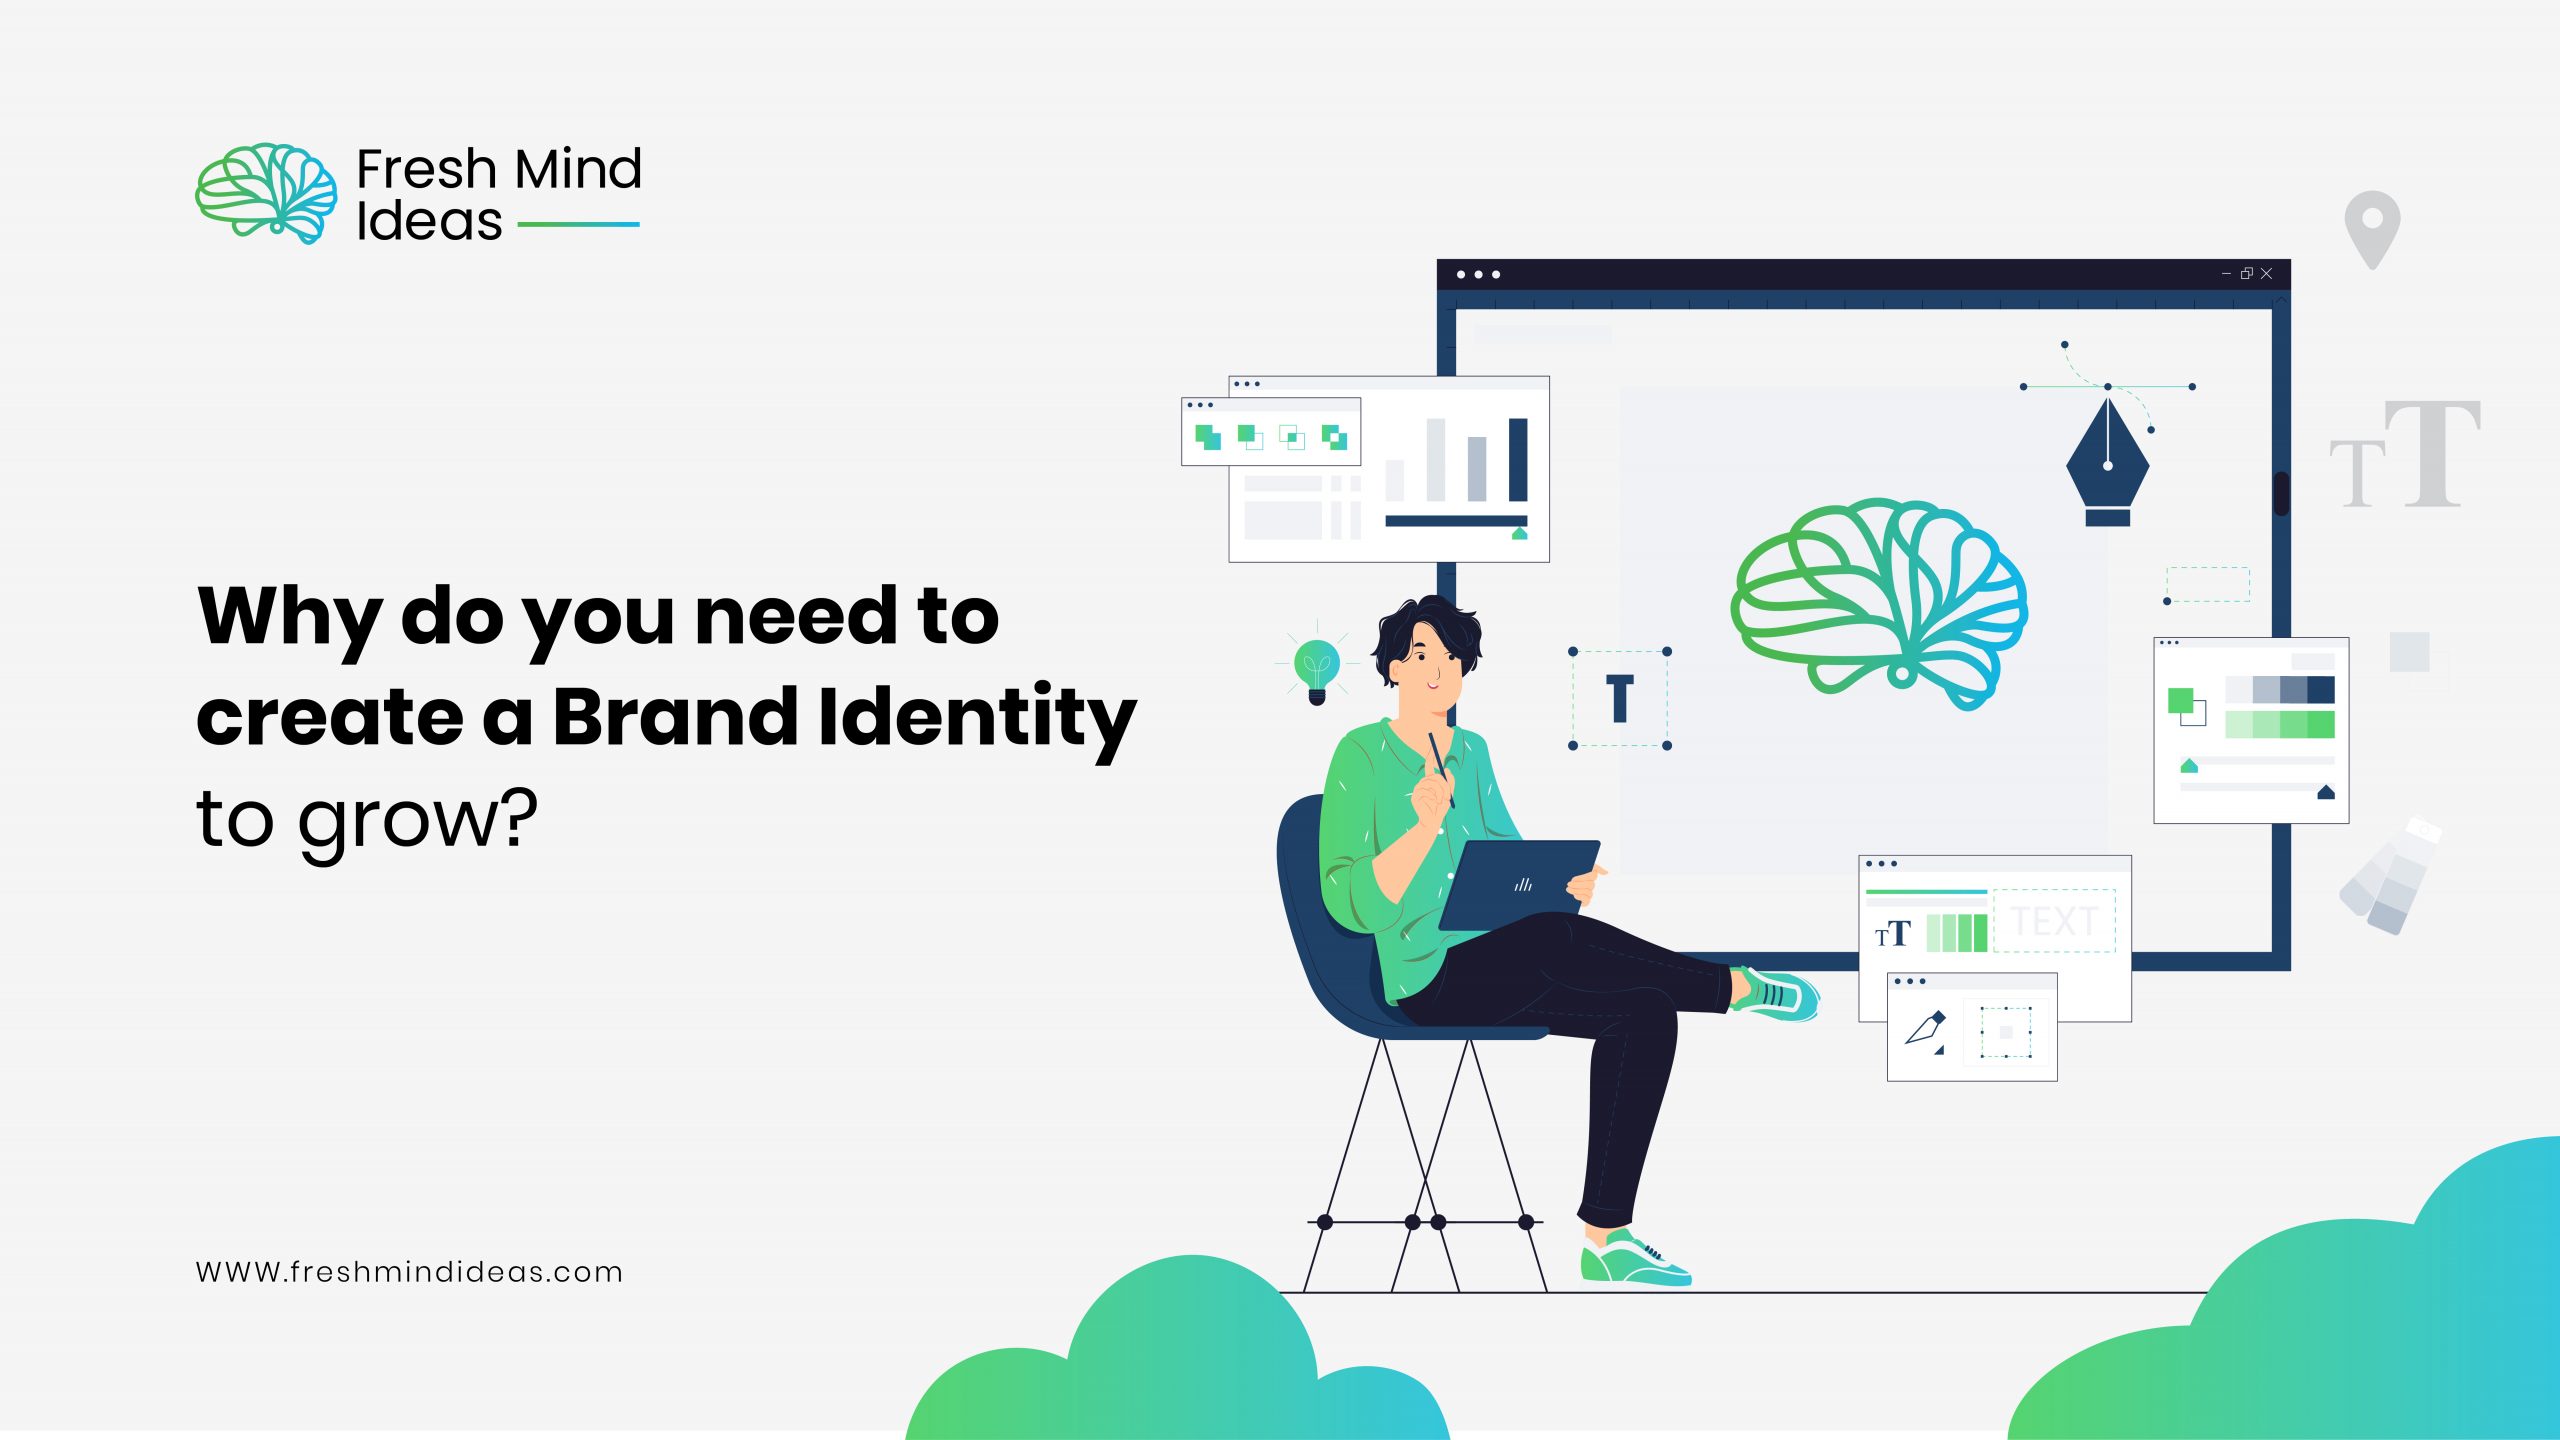 Why do you need to create a Brand Identity to grow?